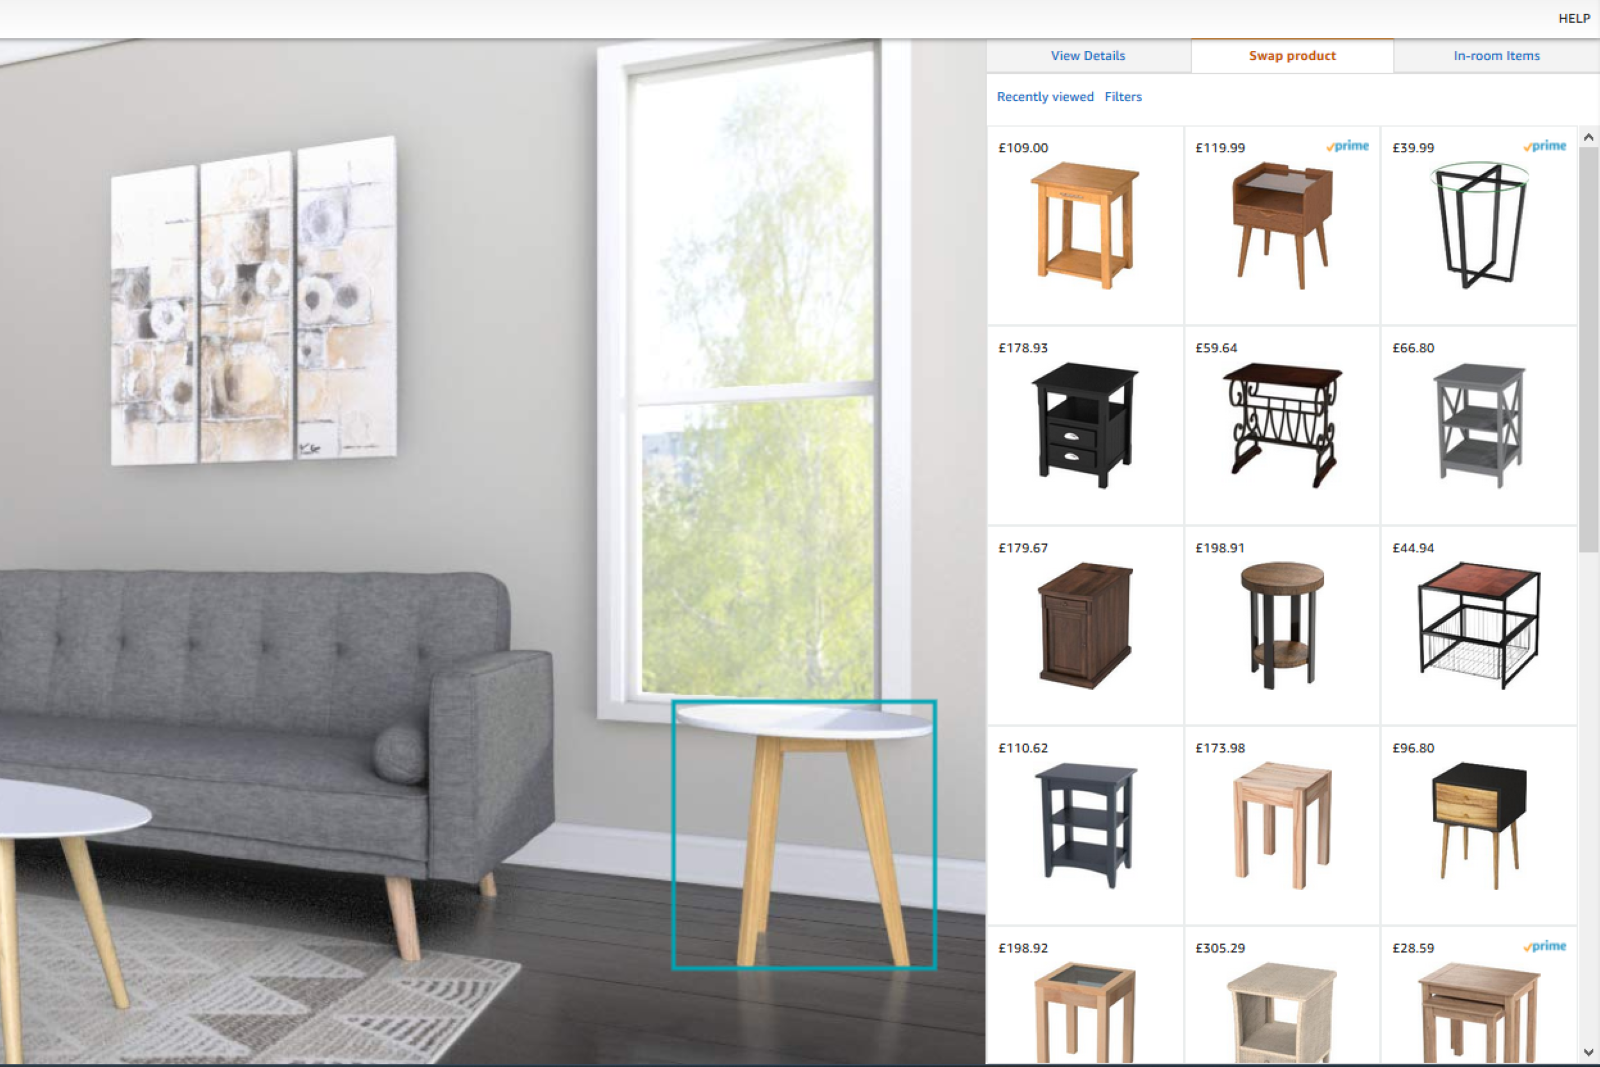 Amazon intros Amazon Showroom so you can see potential purchases in your home image 1